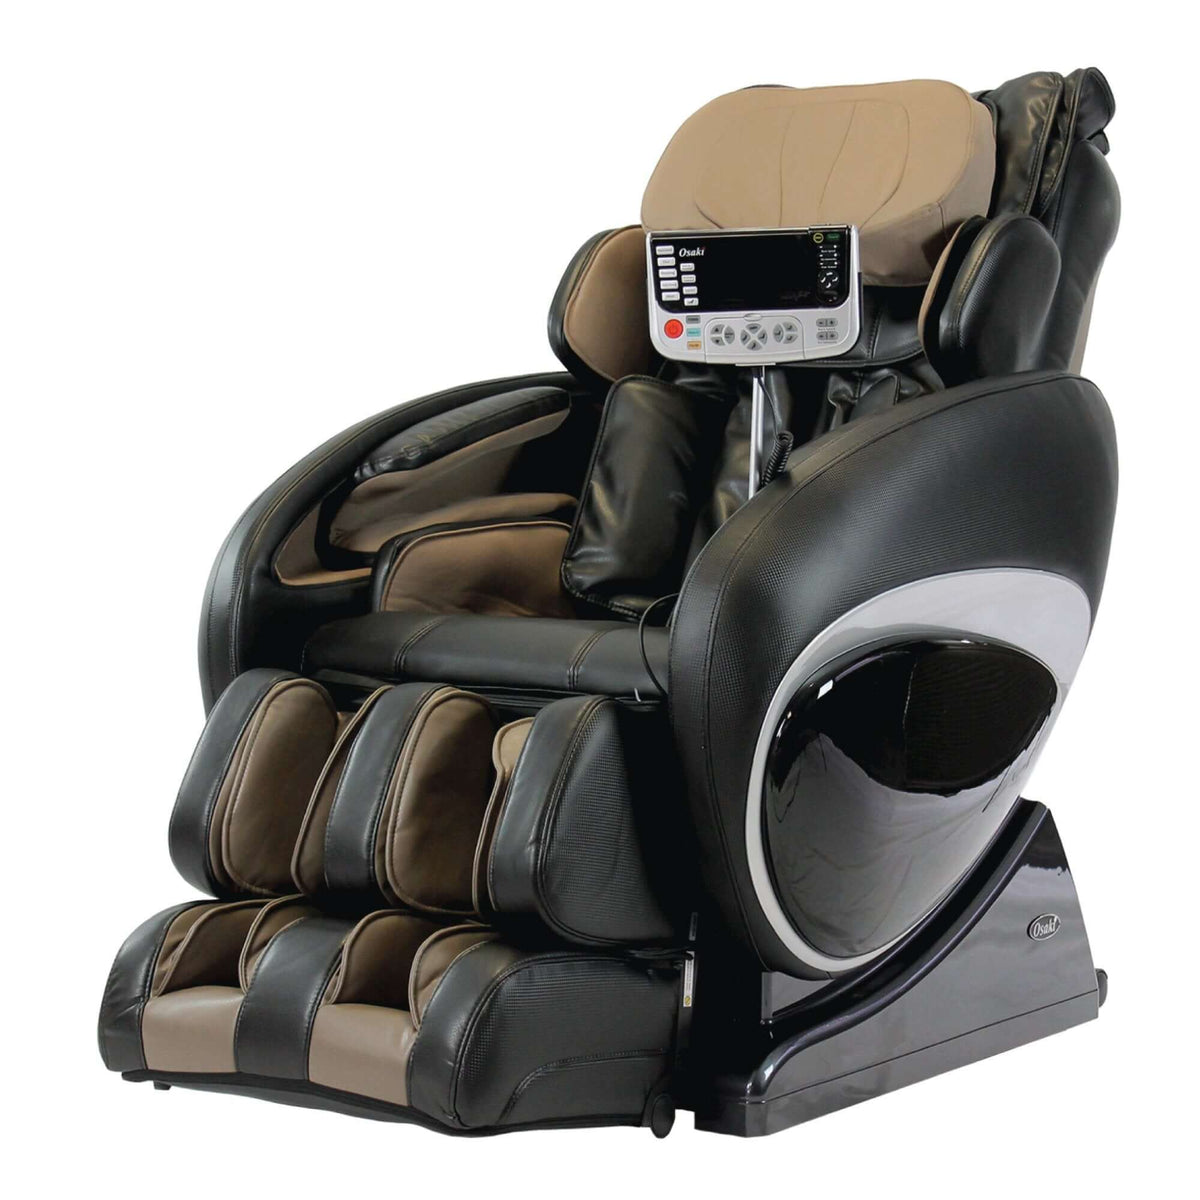 Osaki OS-4000T Massage Chair - sku-45630854824252BlackCurbside Delivery - Free1 Year(Parts/Labor) 2&3 Year(Parts Only) - FreeClearance ChairMassage ChairRecovAthlete